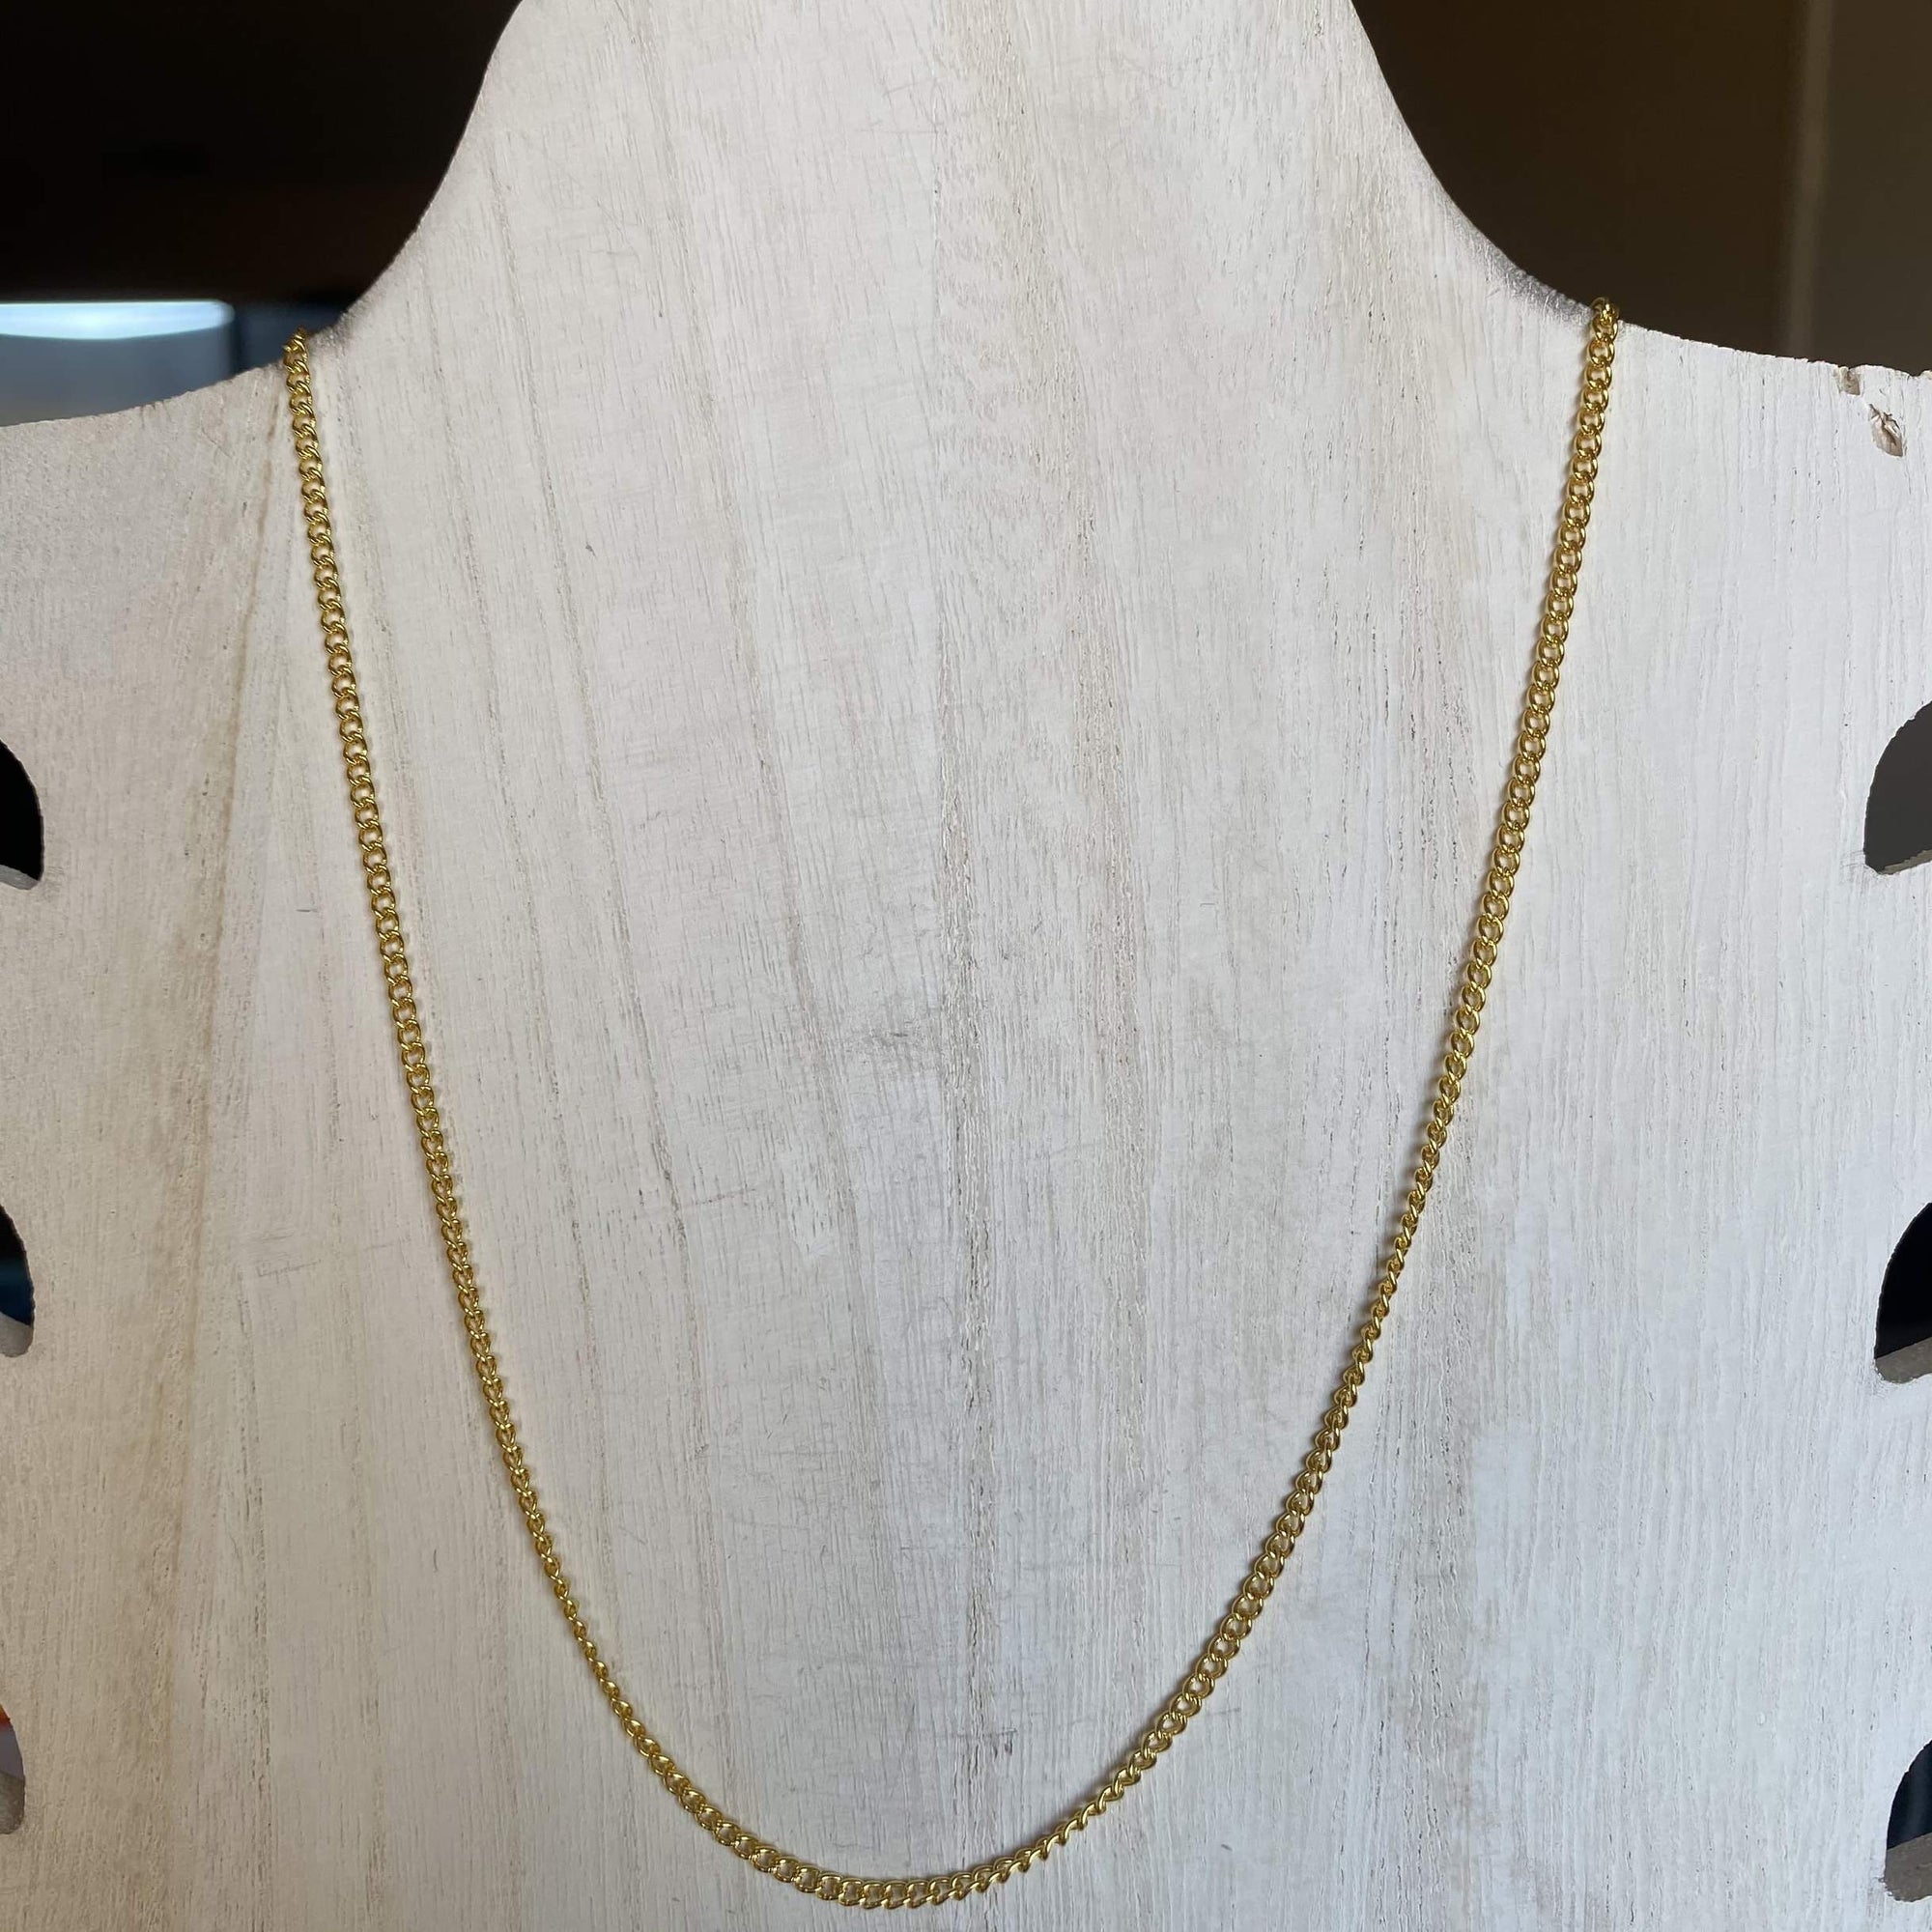 Gold Plated Necklace Chain - 20in